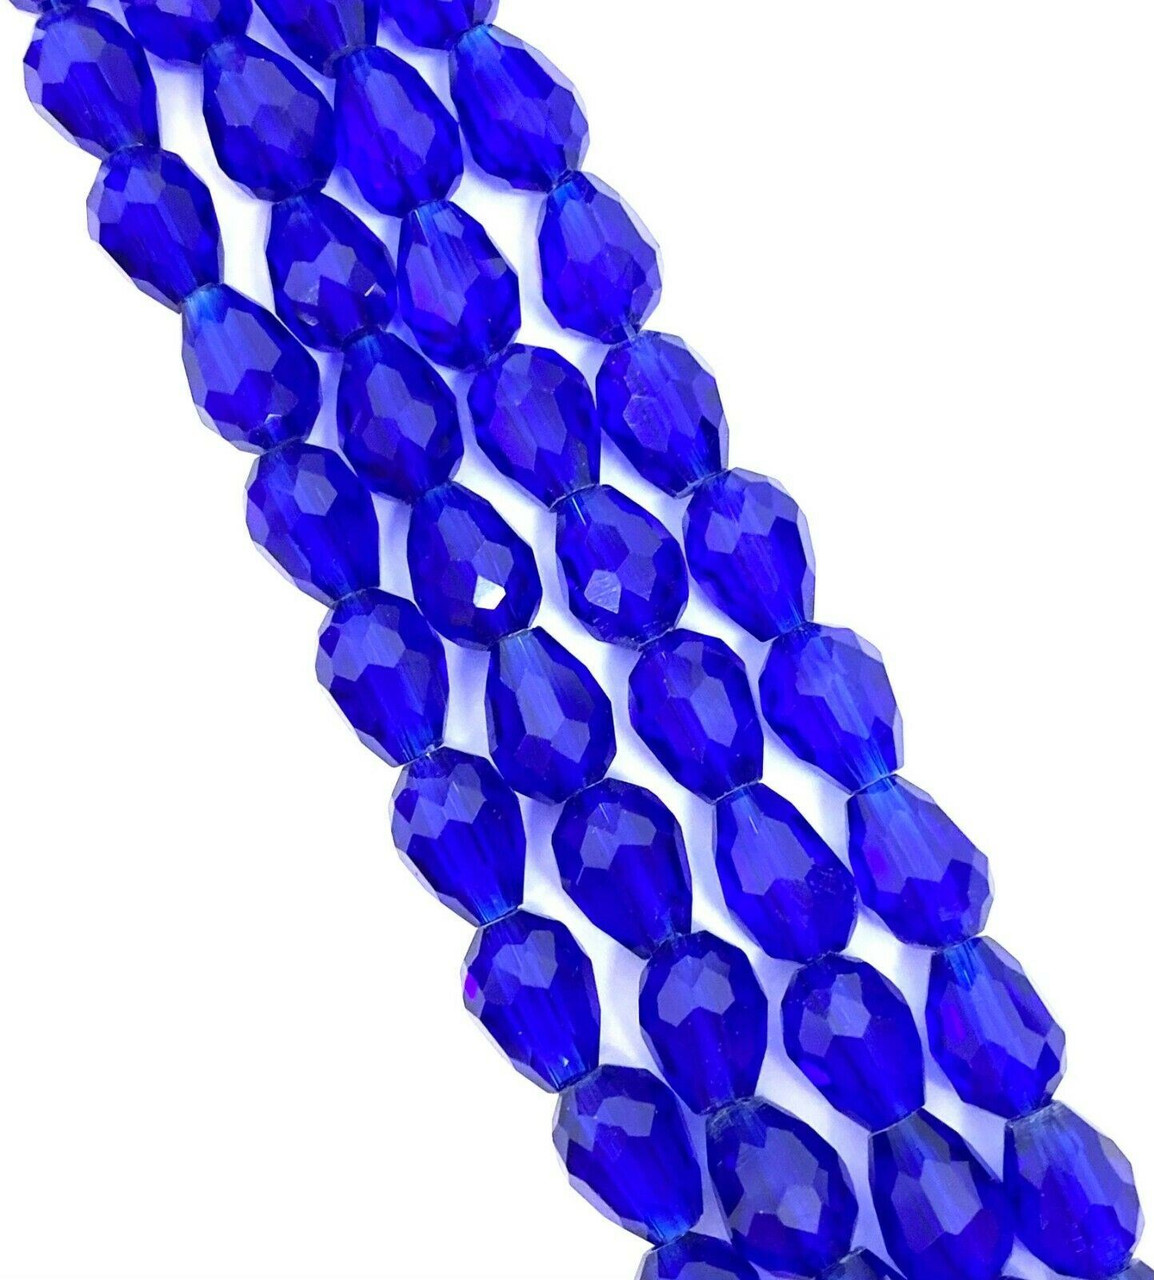 15mm x 10mm glass faceted tear drop beads (briolettes) pack of 24 beads - DEEP BLUE